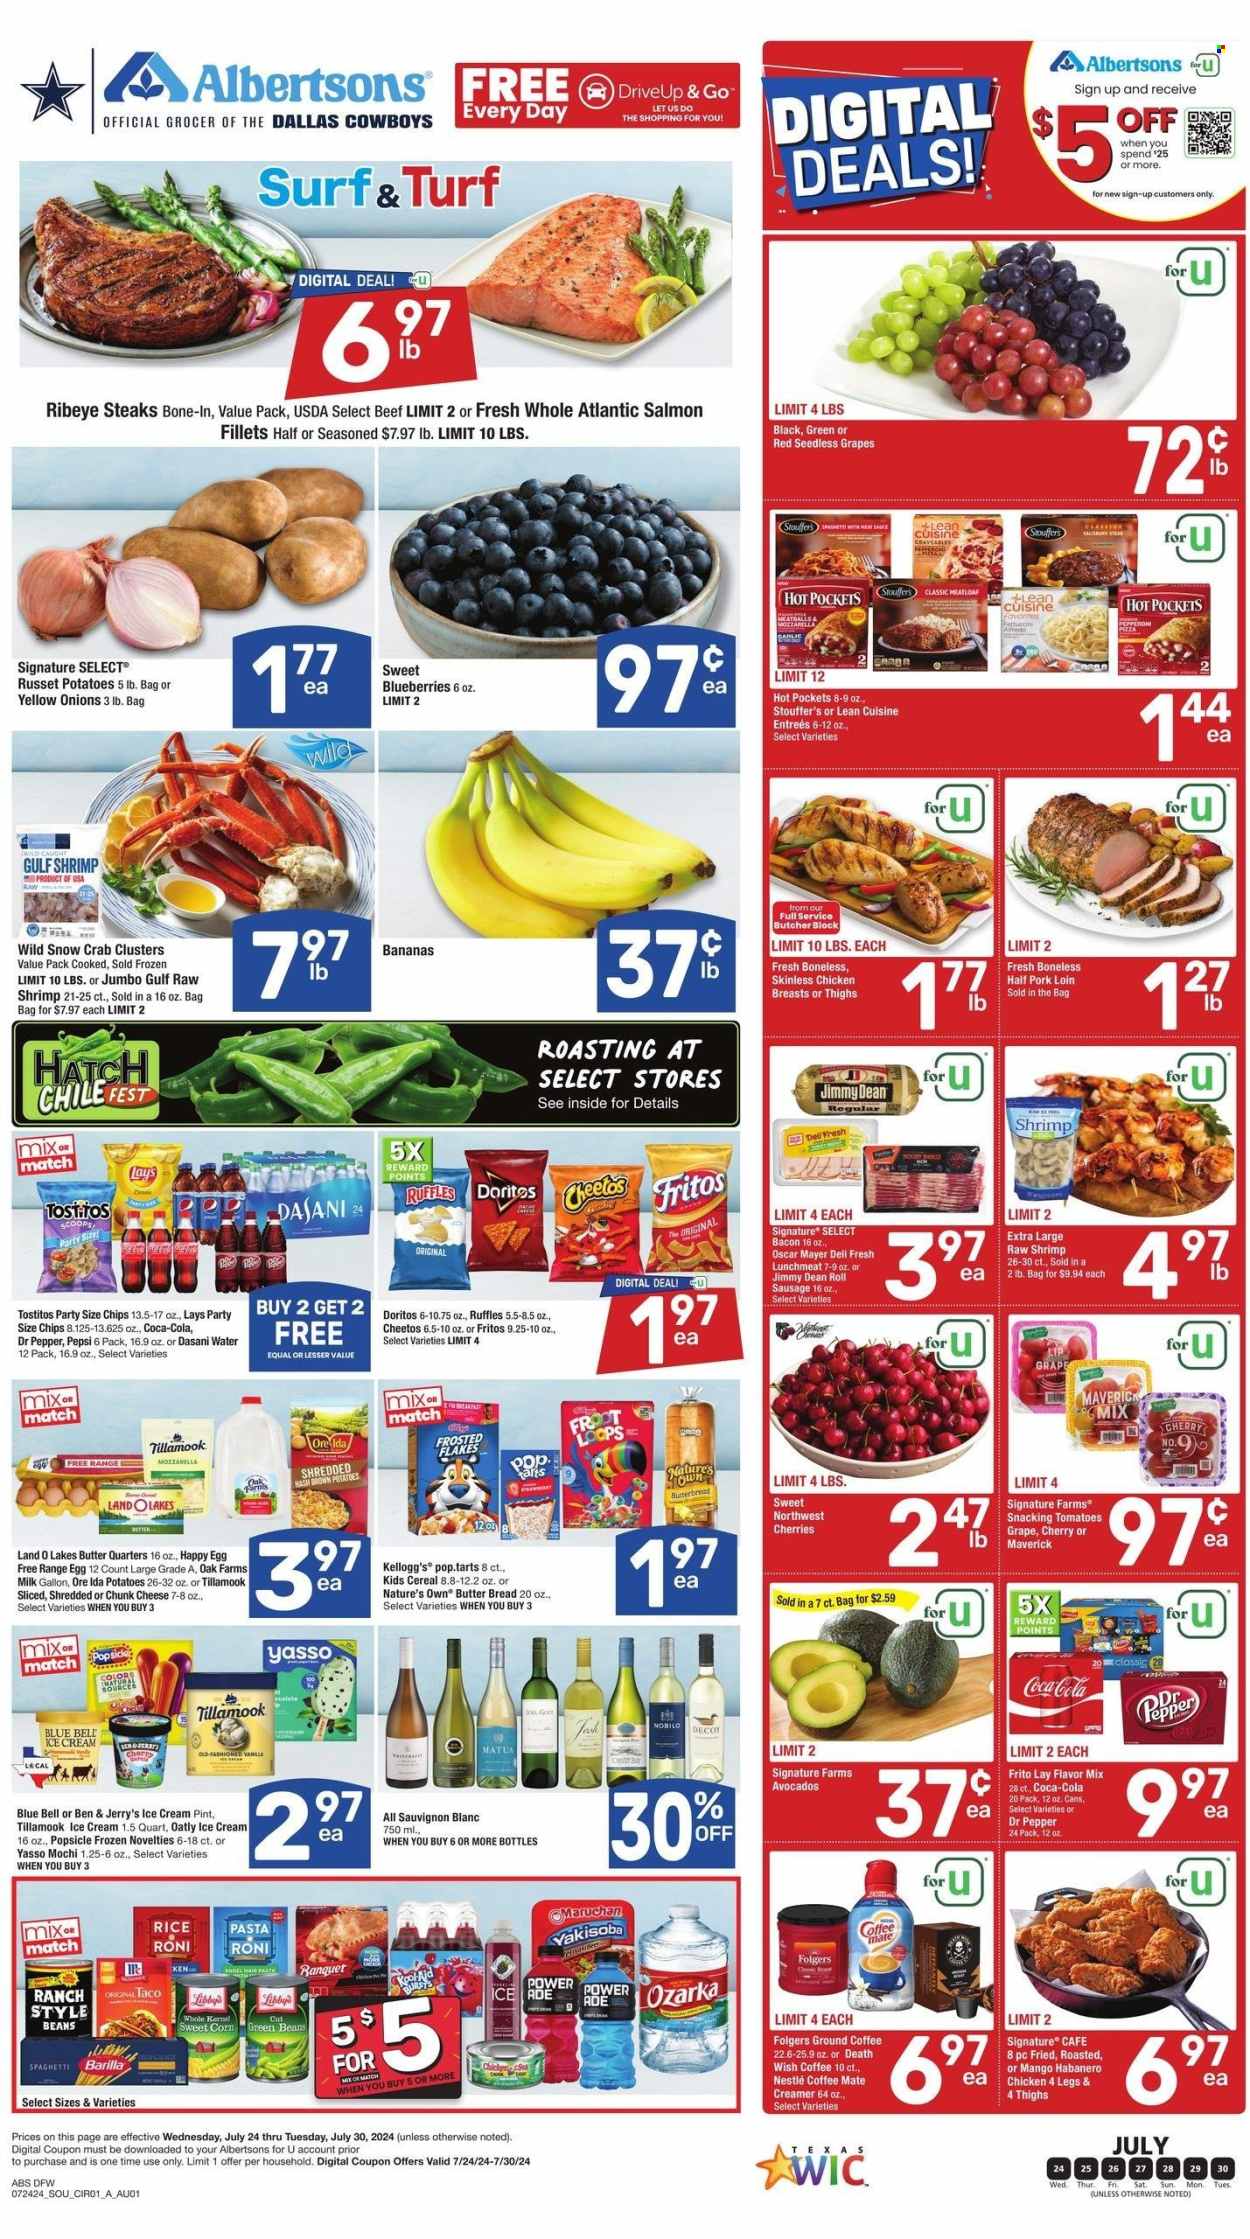 thumbnail - Albertsons Flyer - 07/24/2024 - 07/30/2024 - Sales products - russet potatoes, potatoes, onion, fish fillets, salmon, salmon fillet, beef meat, beef steak, steak, ribeye steak, grapes, seedless grapes, hot pocket, Lean Cuisine, ready meal, Stouffer's, bananas, pork loin, pork meat, Jimmy Dean, bacon, Oscar Mayer, sausage, lunch meat, seafood, crab, shrimps, crab clusters, tomatoes, shredded cheese, sliced cheese, cheese, chunk cheese, milk, butter, Ore-Ida, cherries, white wine, wine, alcohol, Sauvignon Blanc, salty snack, Coca-Cola, Dr. Pepper, soft drink, carbonated soft drink, bread, tart, Kellogg's, cereals, Nature's Own, dessert, ice cream, ice cream bars, Ben & Jerry's, Blue Bell, popsicle, Doritos, Fritos, Cheetos, Ruffles, chips, Lay’s, Tostitos, Pepsi, bottled water, water, avocado, Coffee-Mate, creamer, coffee and tea creamer, Nestlé, Folgers, ground coffee, habanero chicken, blueberries, chicken breasts, chicken thighs, chicken. Page 1.